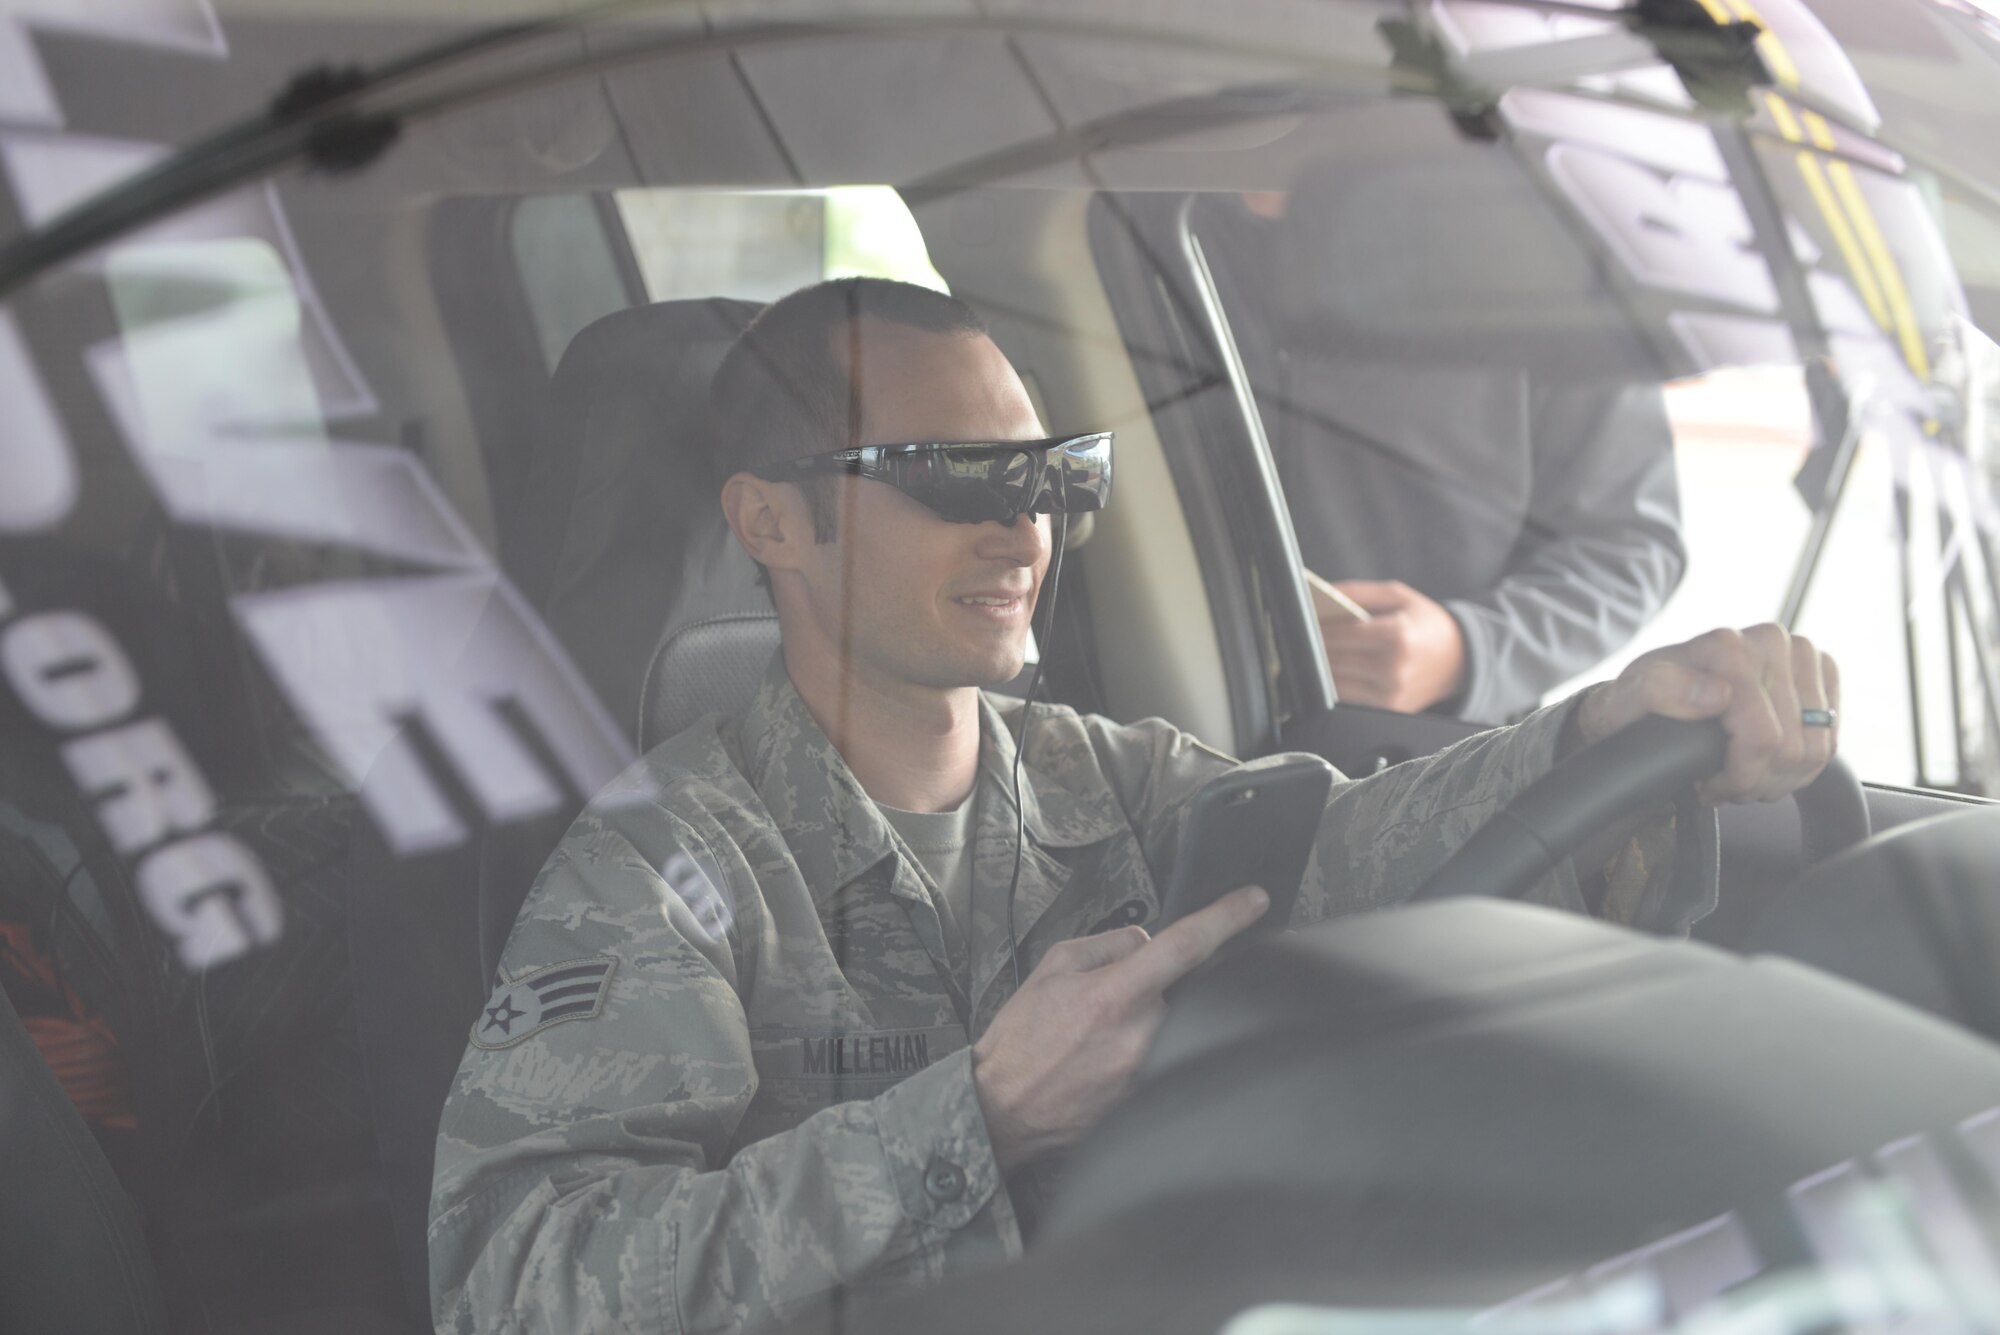 Senior Airman Ryan Milleman, 9th Aircraft Maintenance Squadron crew chief, operates a virtually simulated vehicle while he tries to text during a demonstration from the Arrive Alive Tour March 28, 2016, at Beale Air Force Base, California. The Arrive Alive Tour provided a demonstration, which gave Airmen the opportunity to experience the realistic effects of driving under the influence, and texting while operating a vehicle. (U.S. Air Force photo by Senior Airman Ramon A. Adelan)